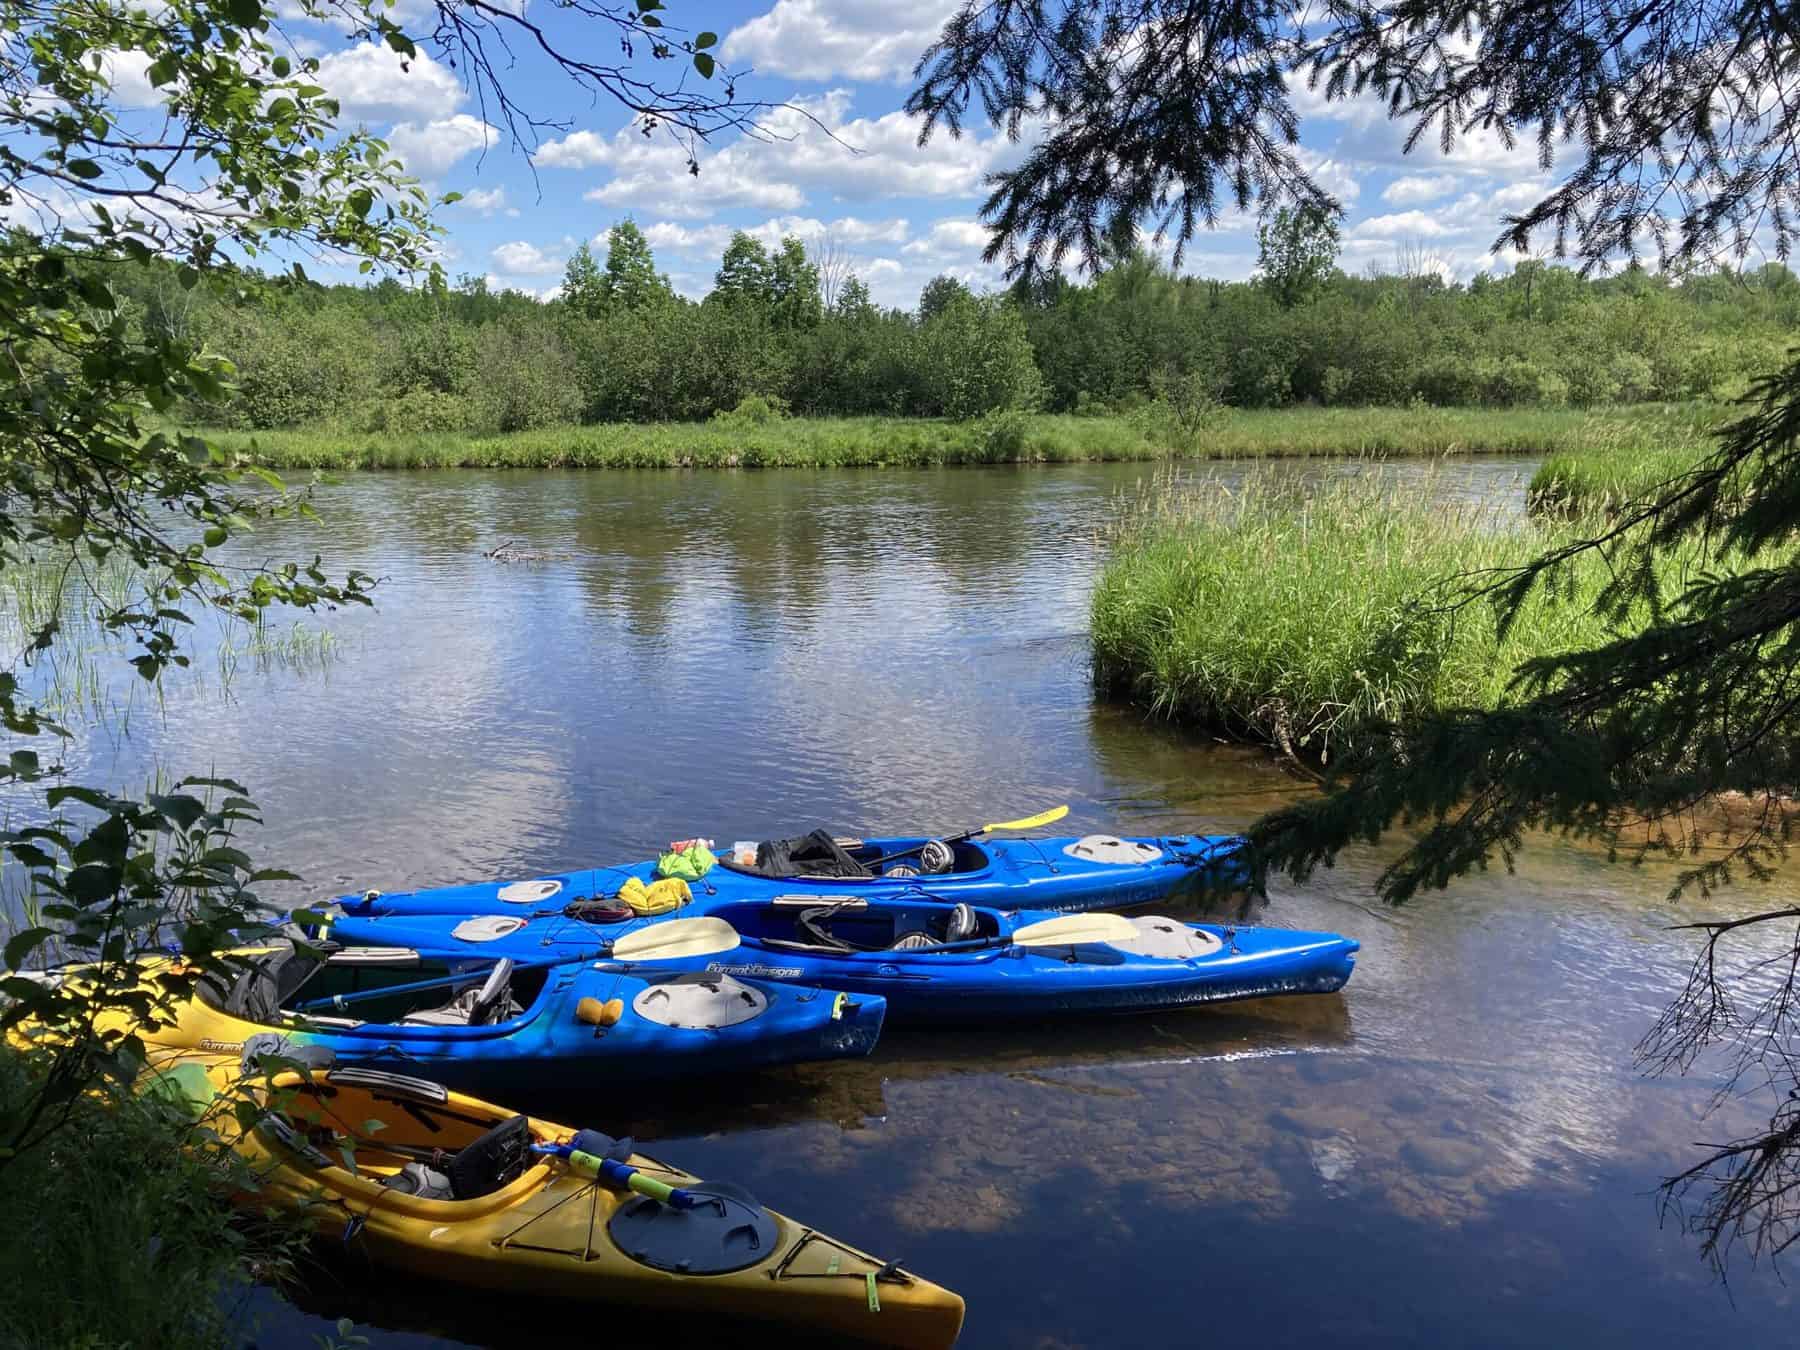 Kayaks on the riverbank of the Namekagon on a sunny dat with blue skies. Photo: conservancy Paddle Participant